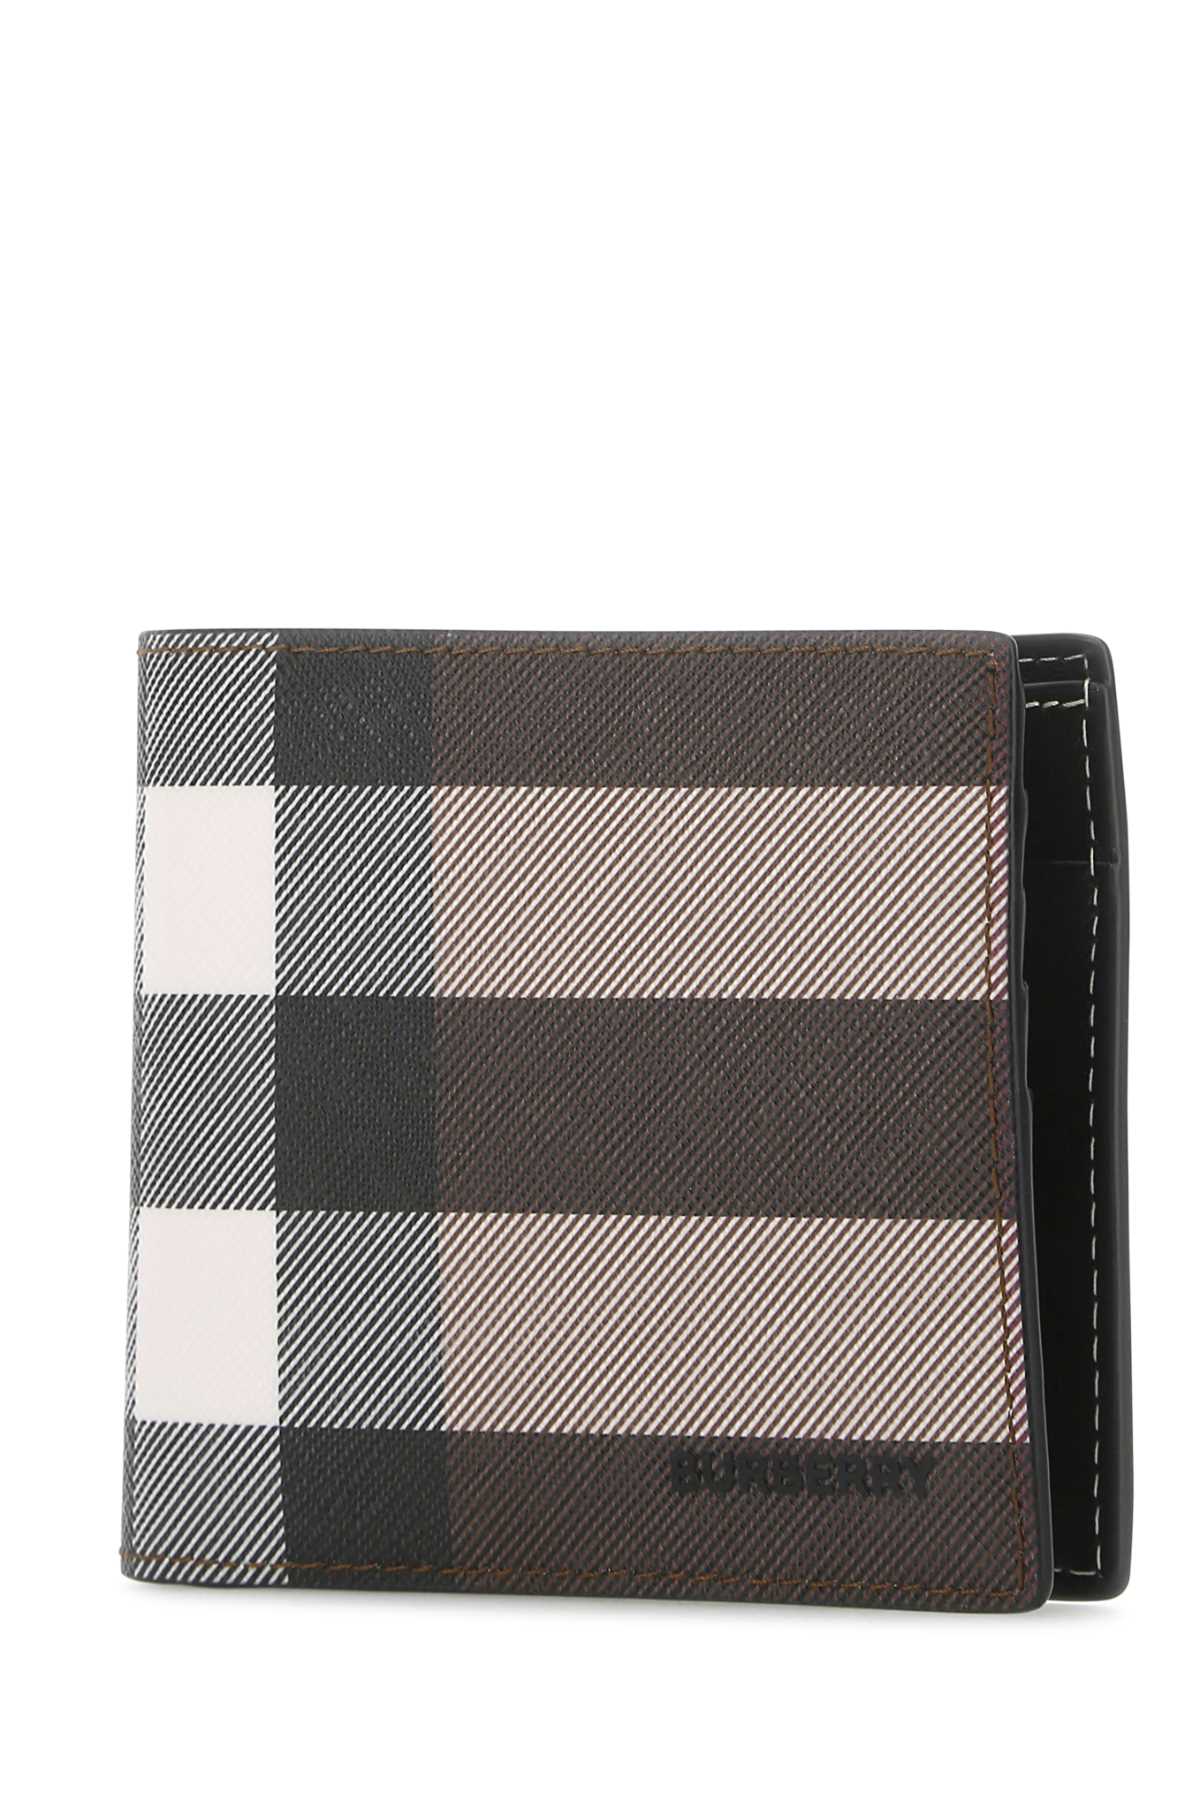 Burberry Printed E-canvas Wallet In A8900